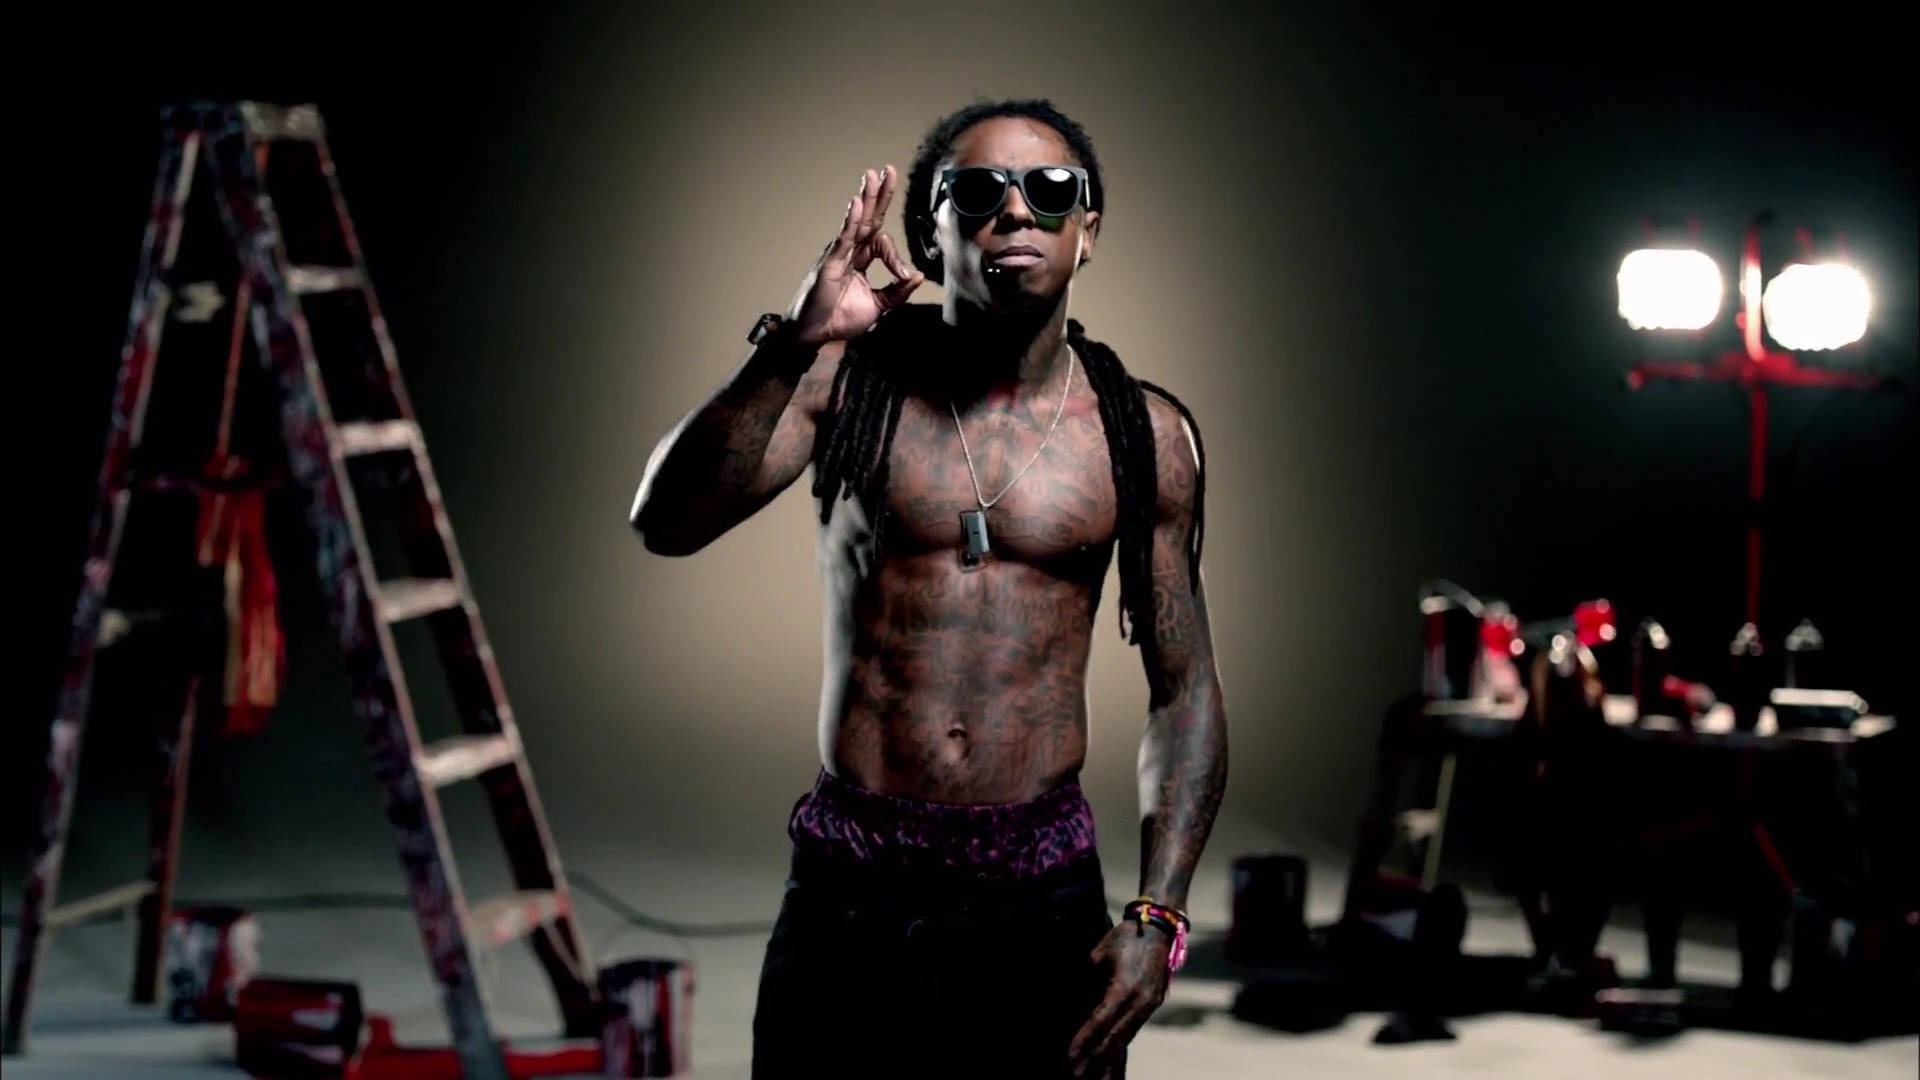 1920X1080 Lil Wayne Wallpaper and Background